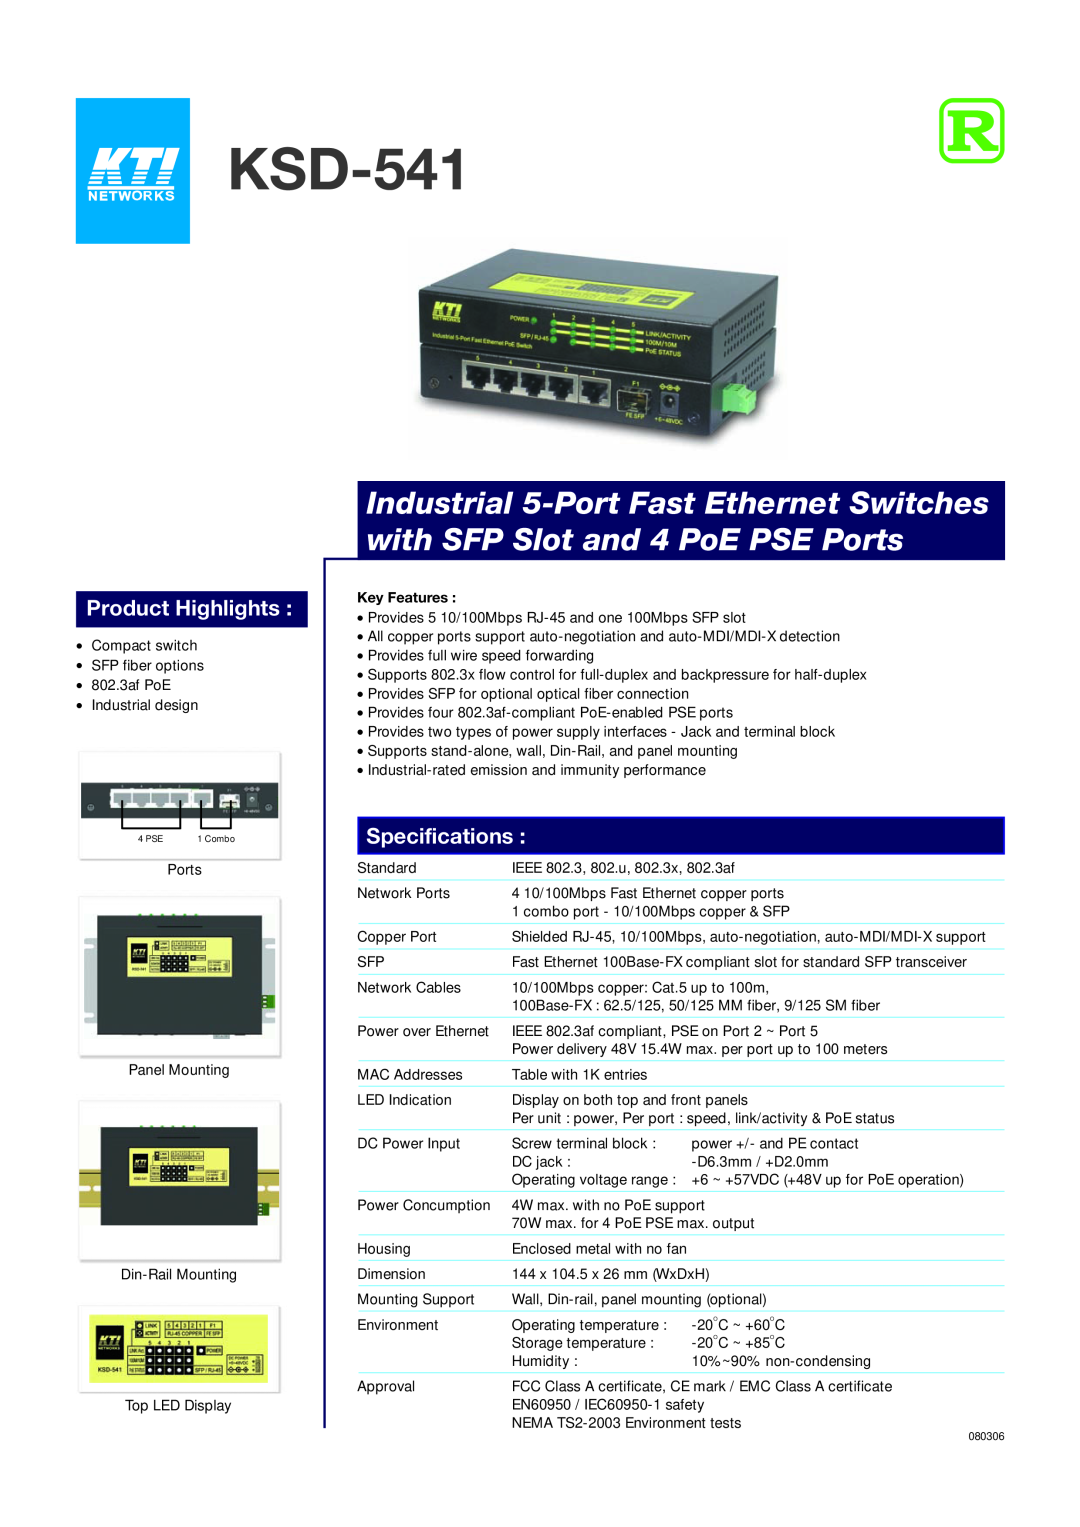 KTI Networks KSD-541 specifications Key Features, Product Highlights, Specifications 